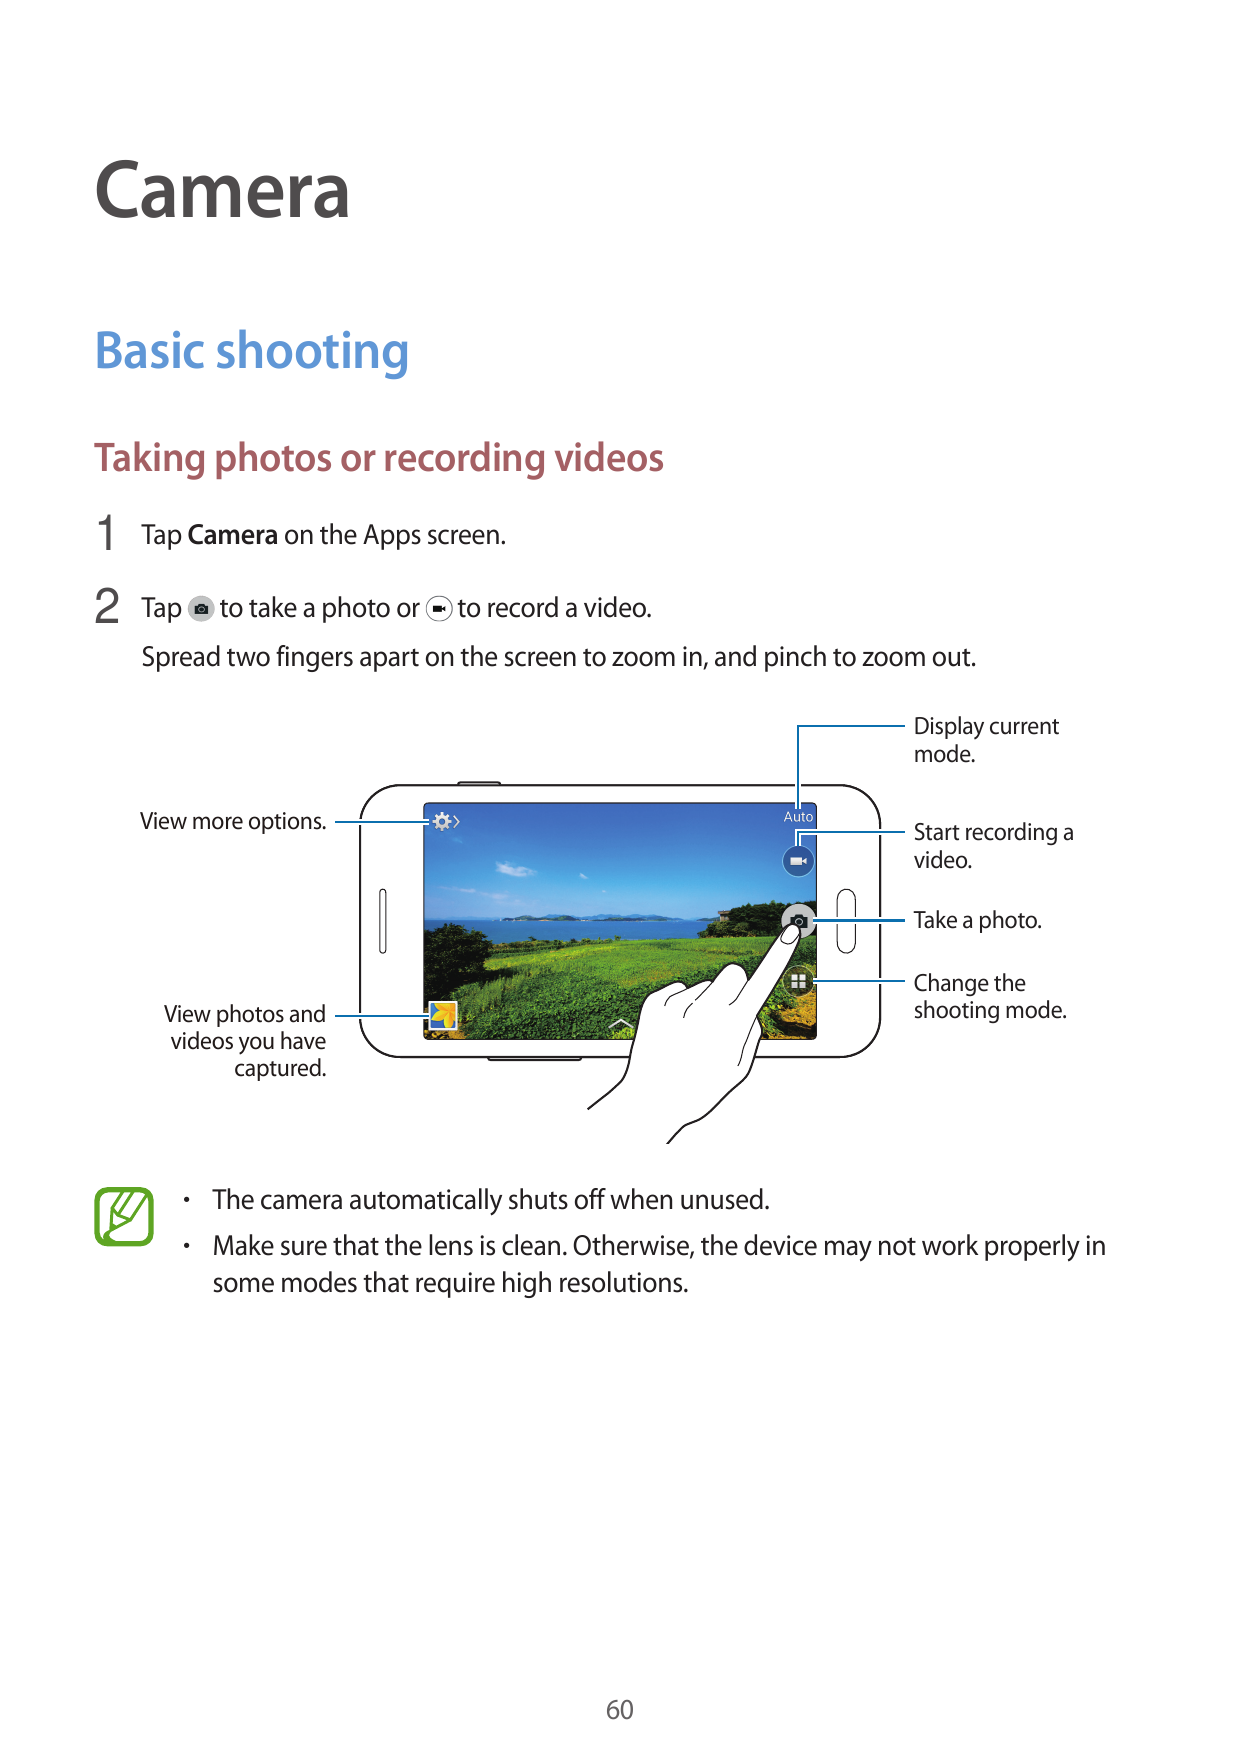 CameraBasic shootingTaking photos or recording videos1 Tap Camera on the Apps screen.2 Tap to take a photo or to record a video.